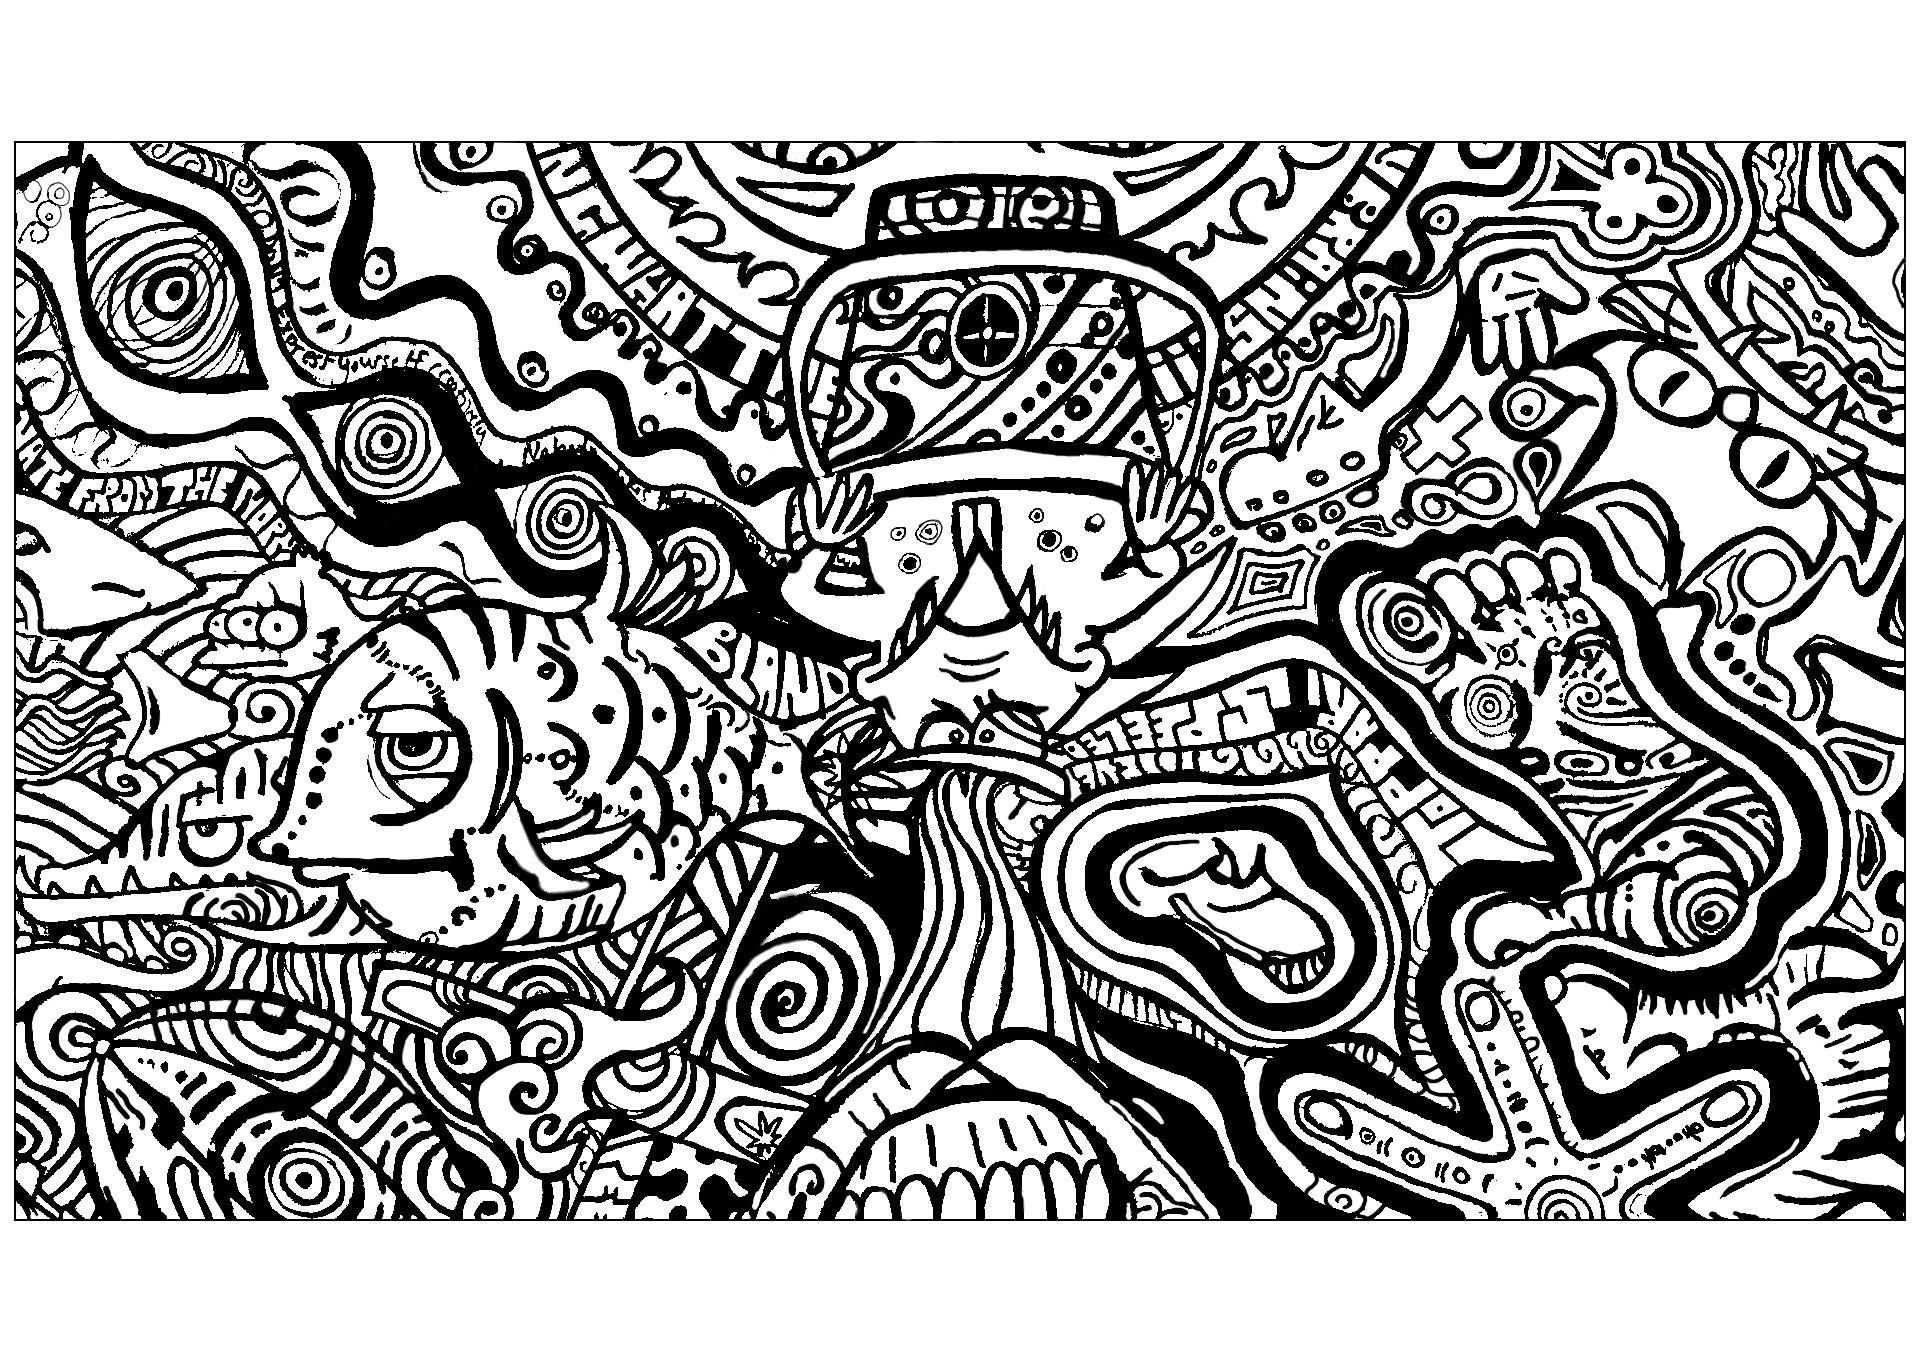 Download Psychedelic fish and feet - Psychedelic Adult Coloring Pages